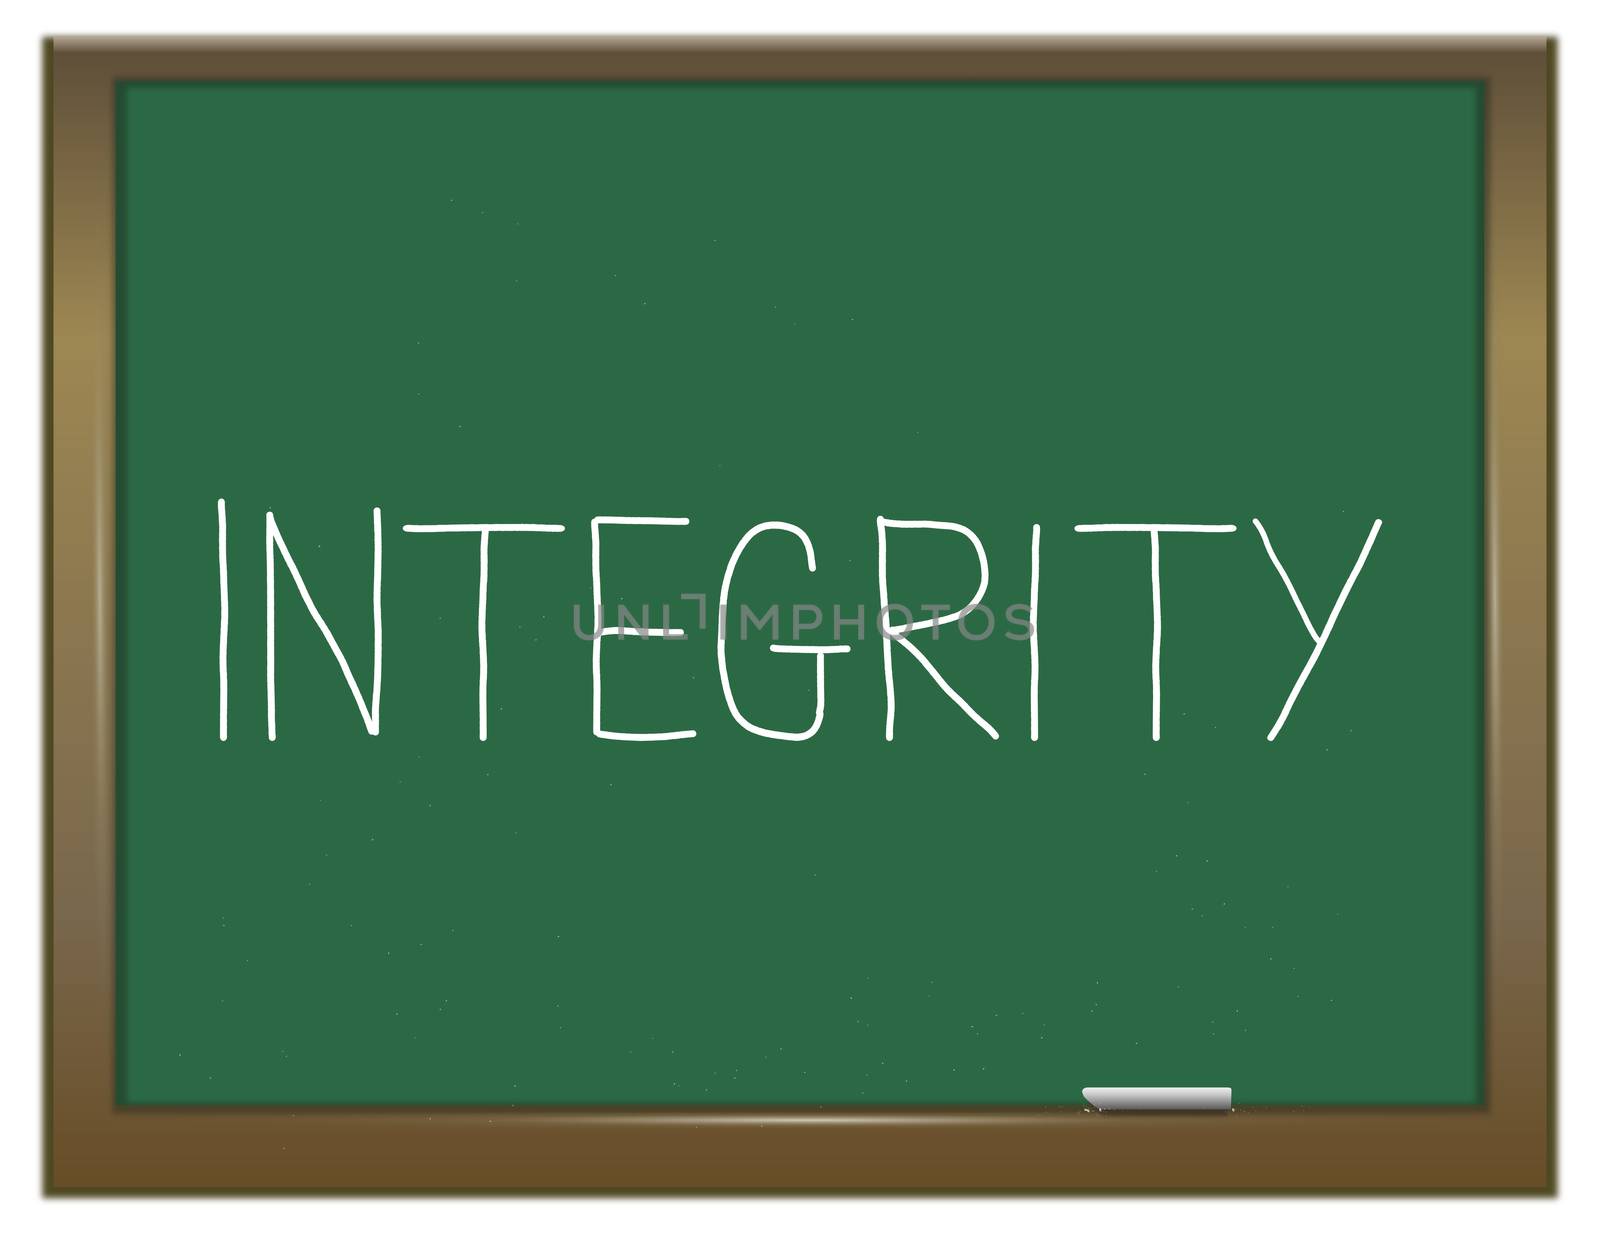 Illustration depicting a green chalkboard with an integrity concept.